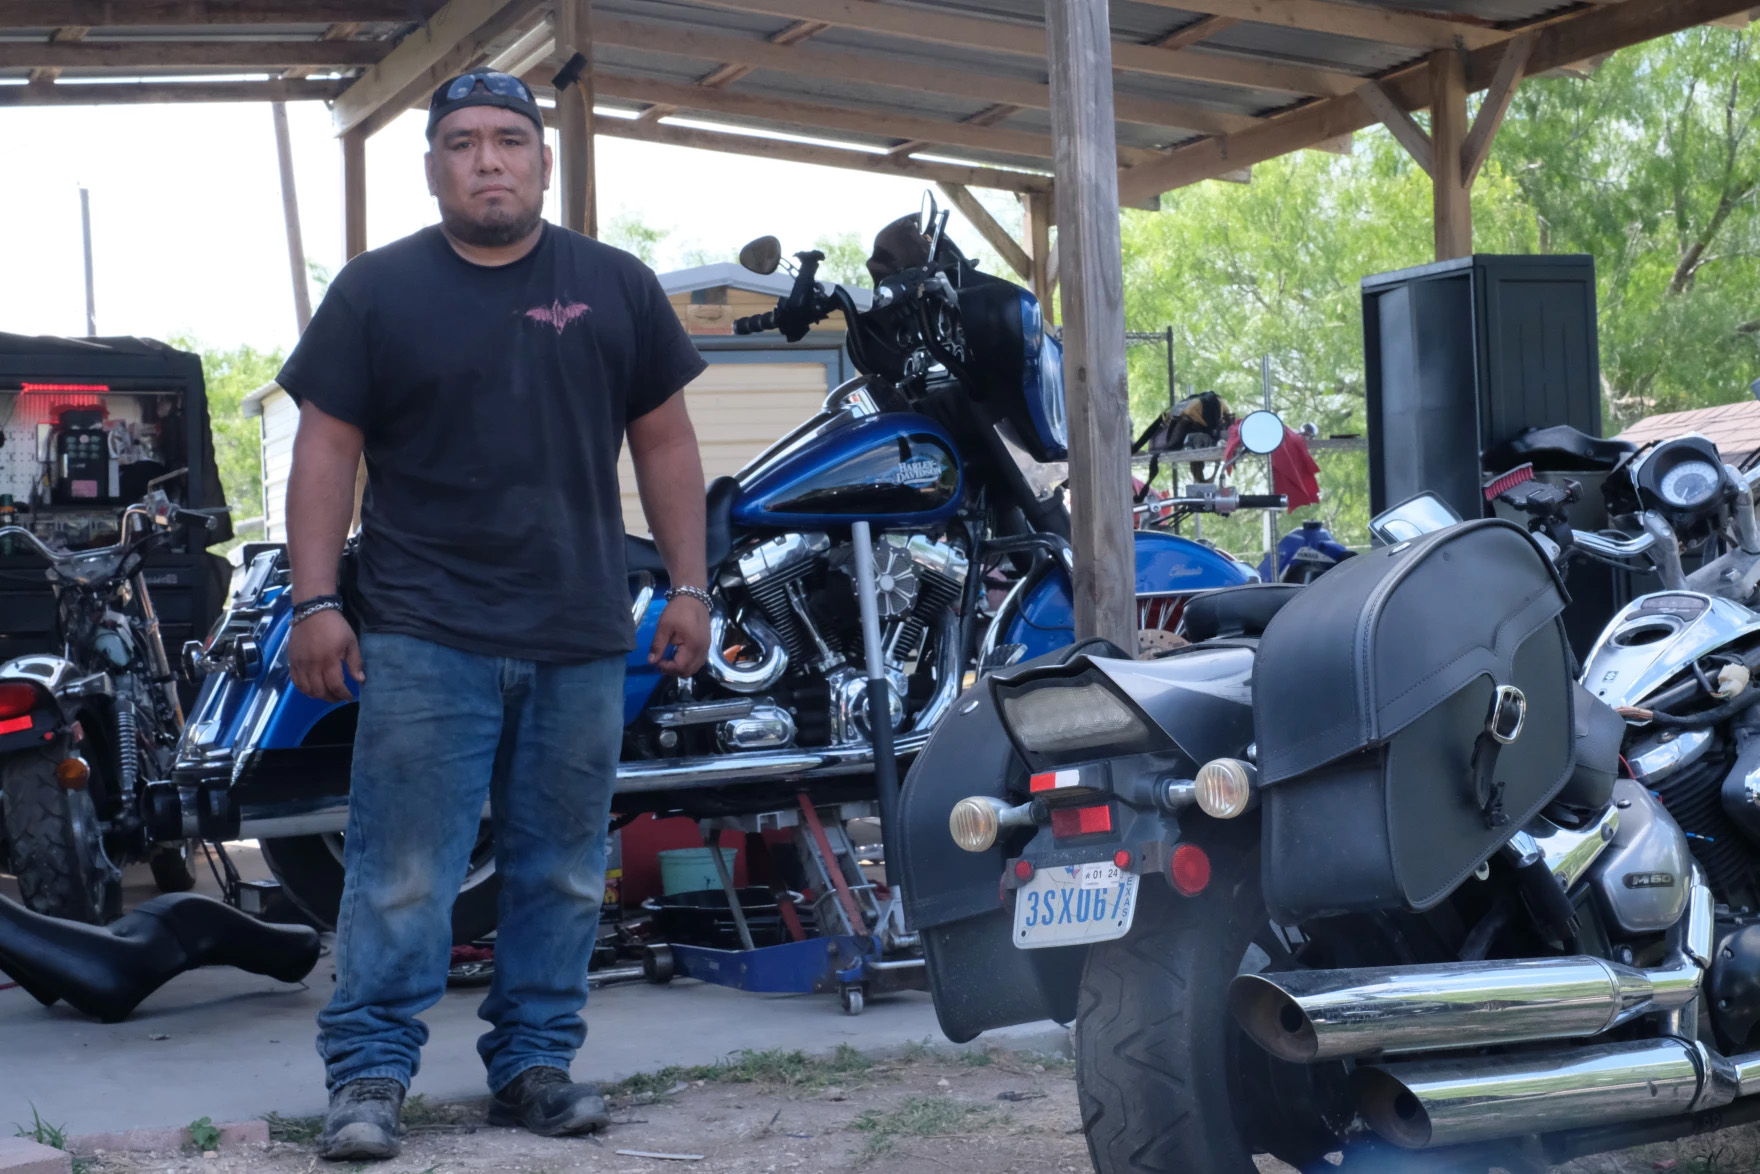 A man stands outside, facing the camera, under an awning. Several motorcycles are seen behind him and in the foreground. He's wearing a t-shirt and blue jeans that show some wear. This is Edgar Flores.